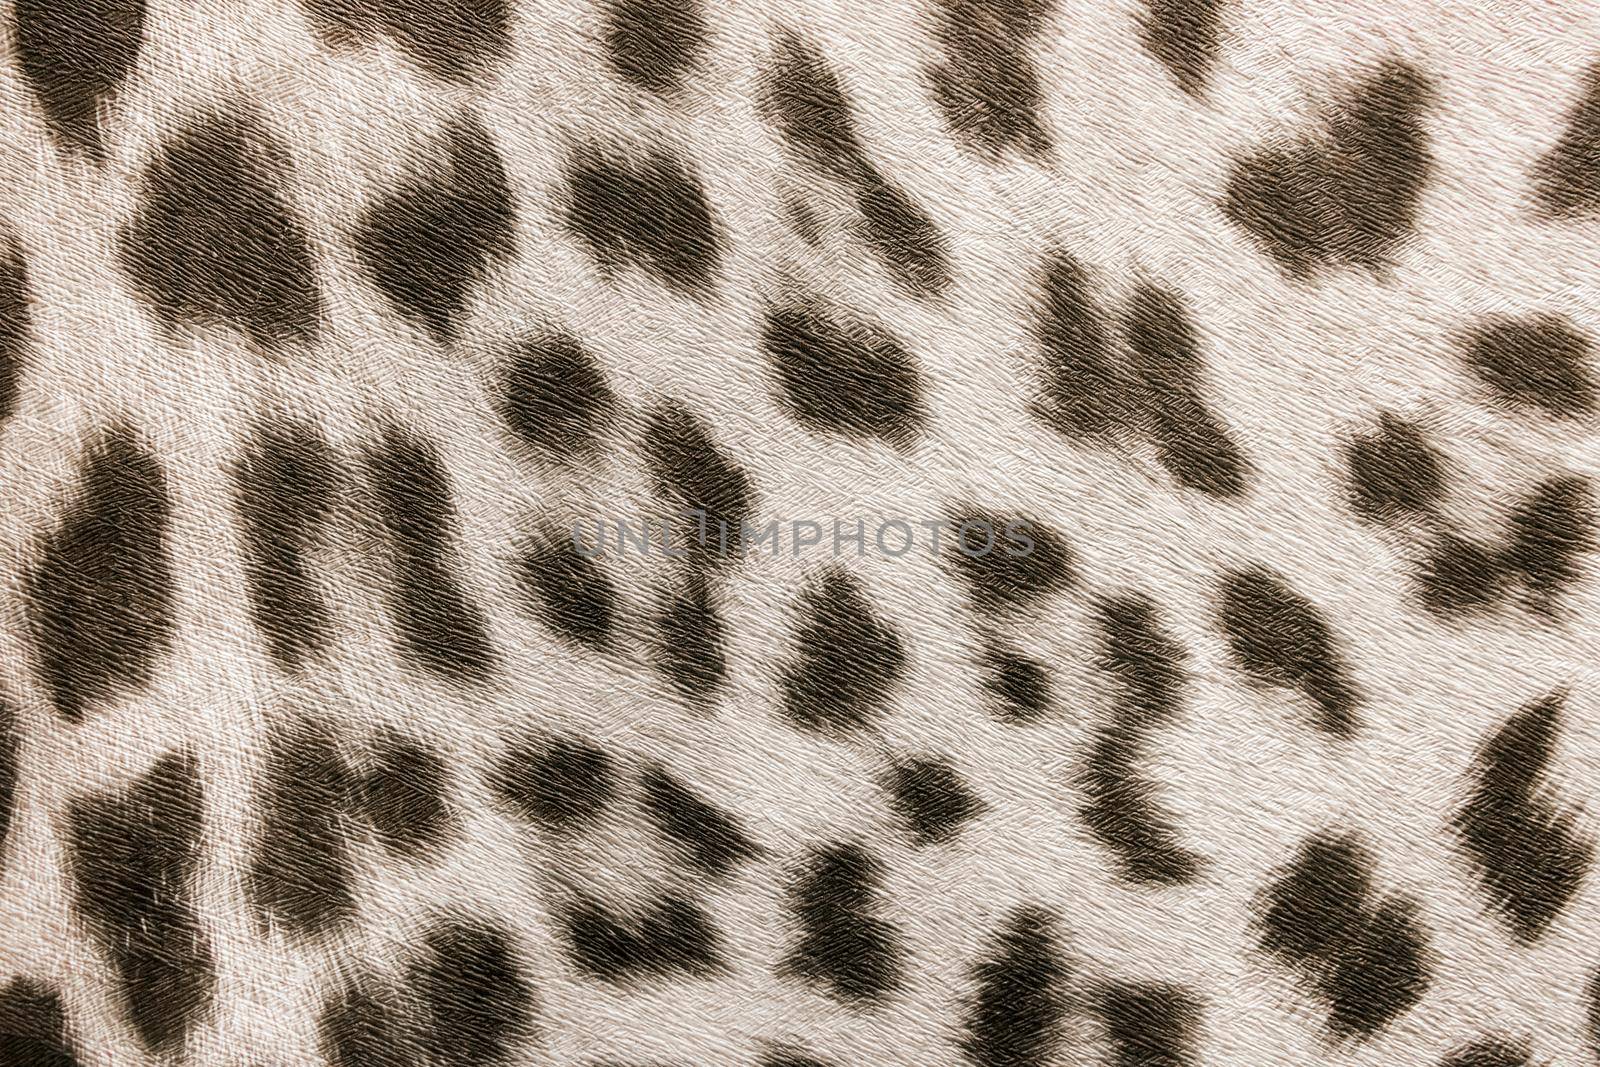 Wallpaper light spots with abstract leopard pattern, seamless paper texture wild animals background.